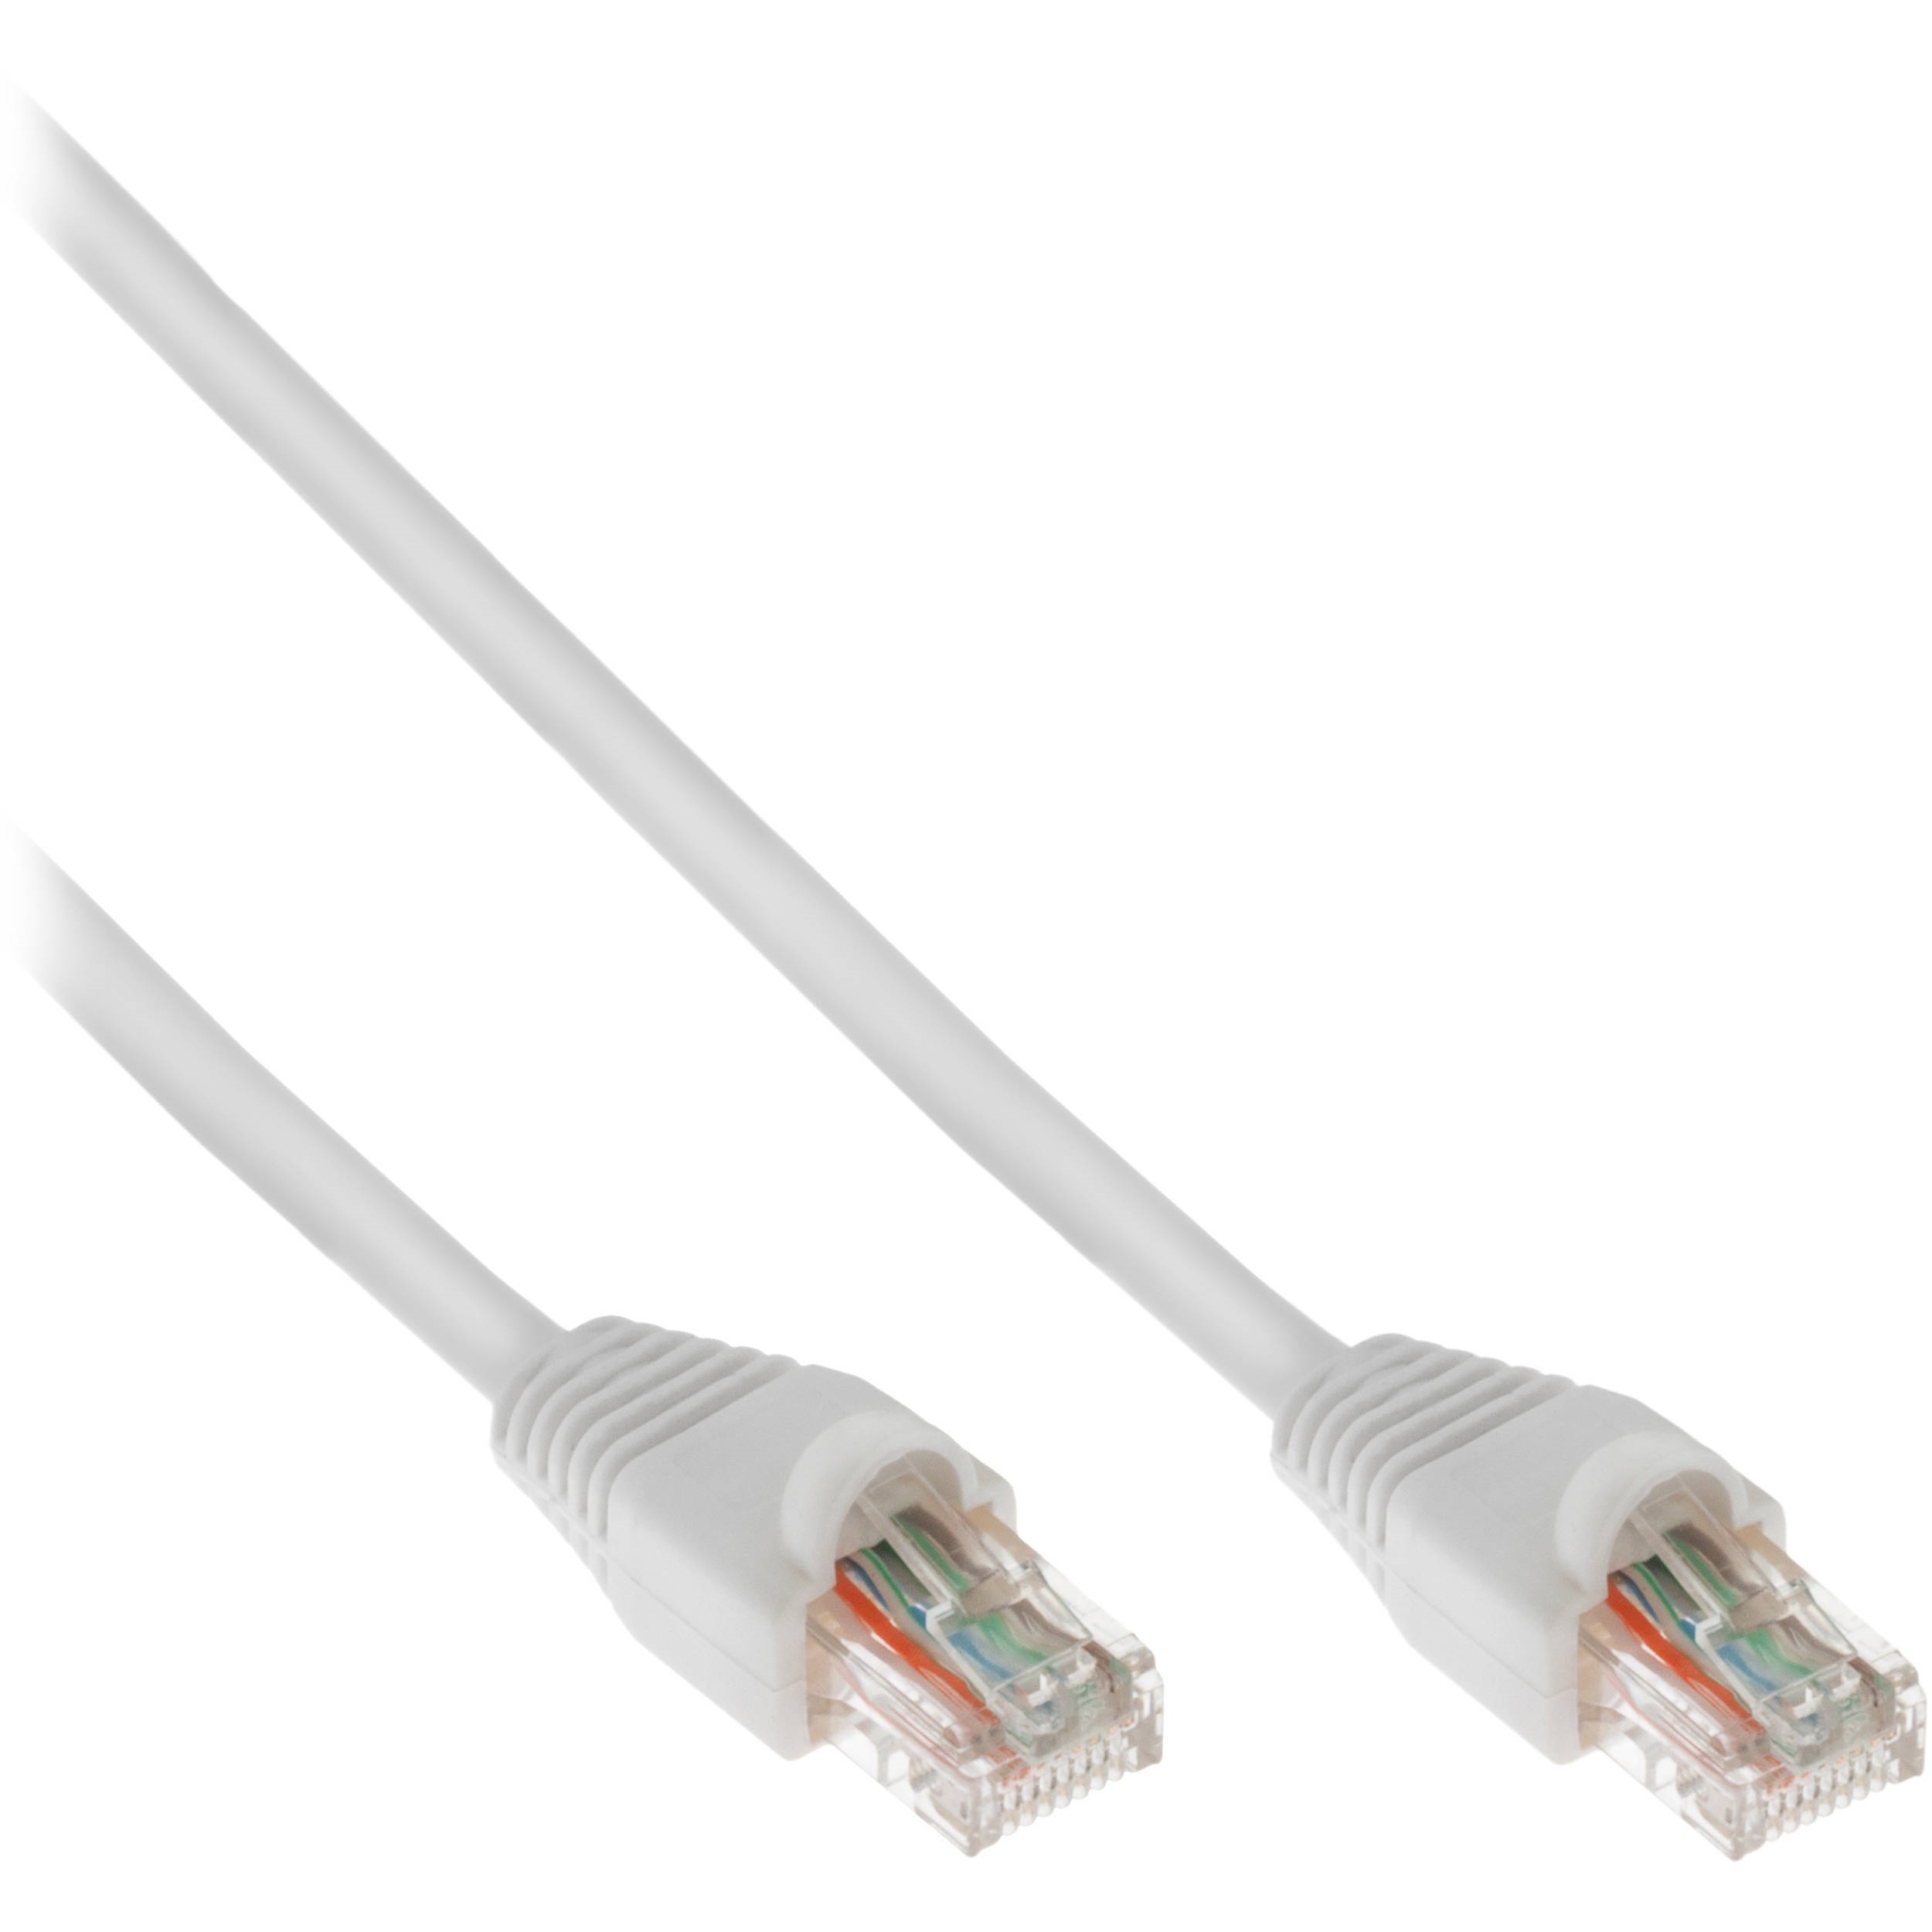 Pearstone Cat 5e Snagless Patch Cable (50', White)